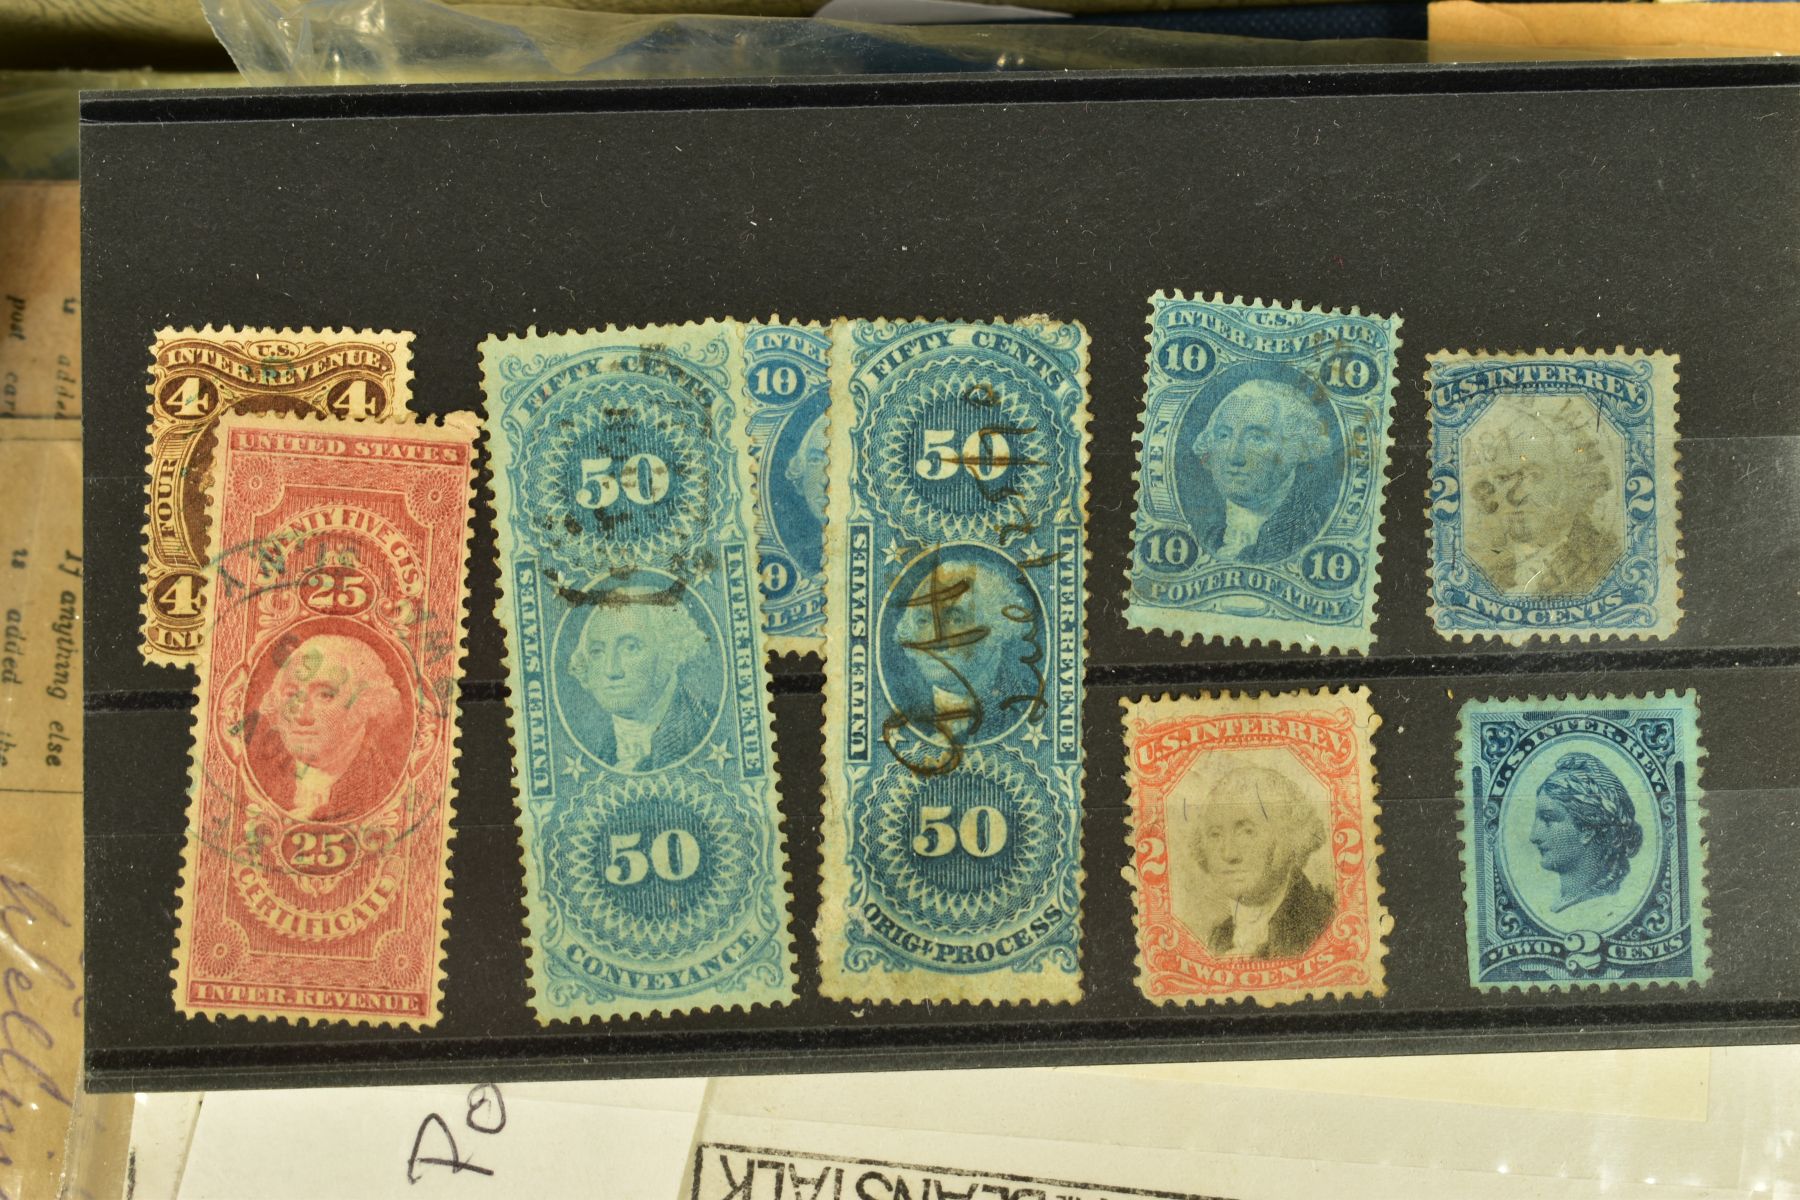 A LARGE BOX OF STAMPS AND ACCESSORIES including some early USA types in mixed condition empty albums - Image 10 of 14